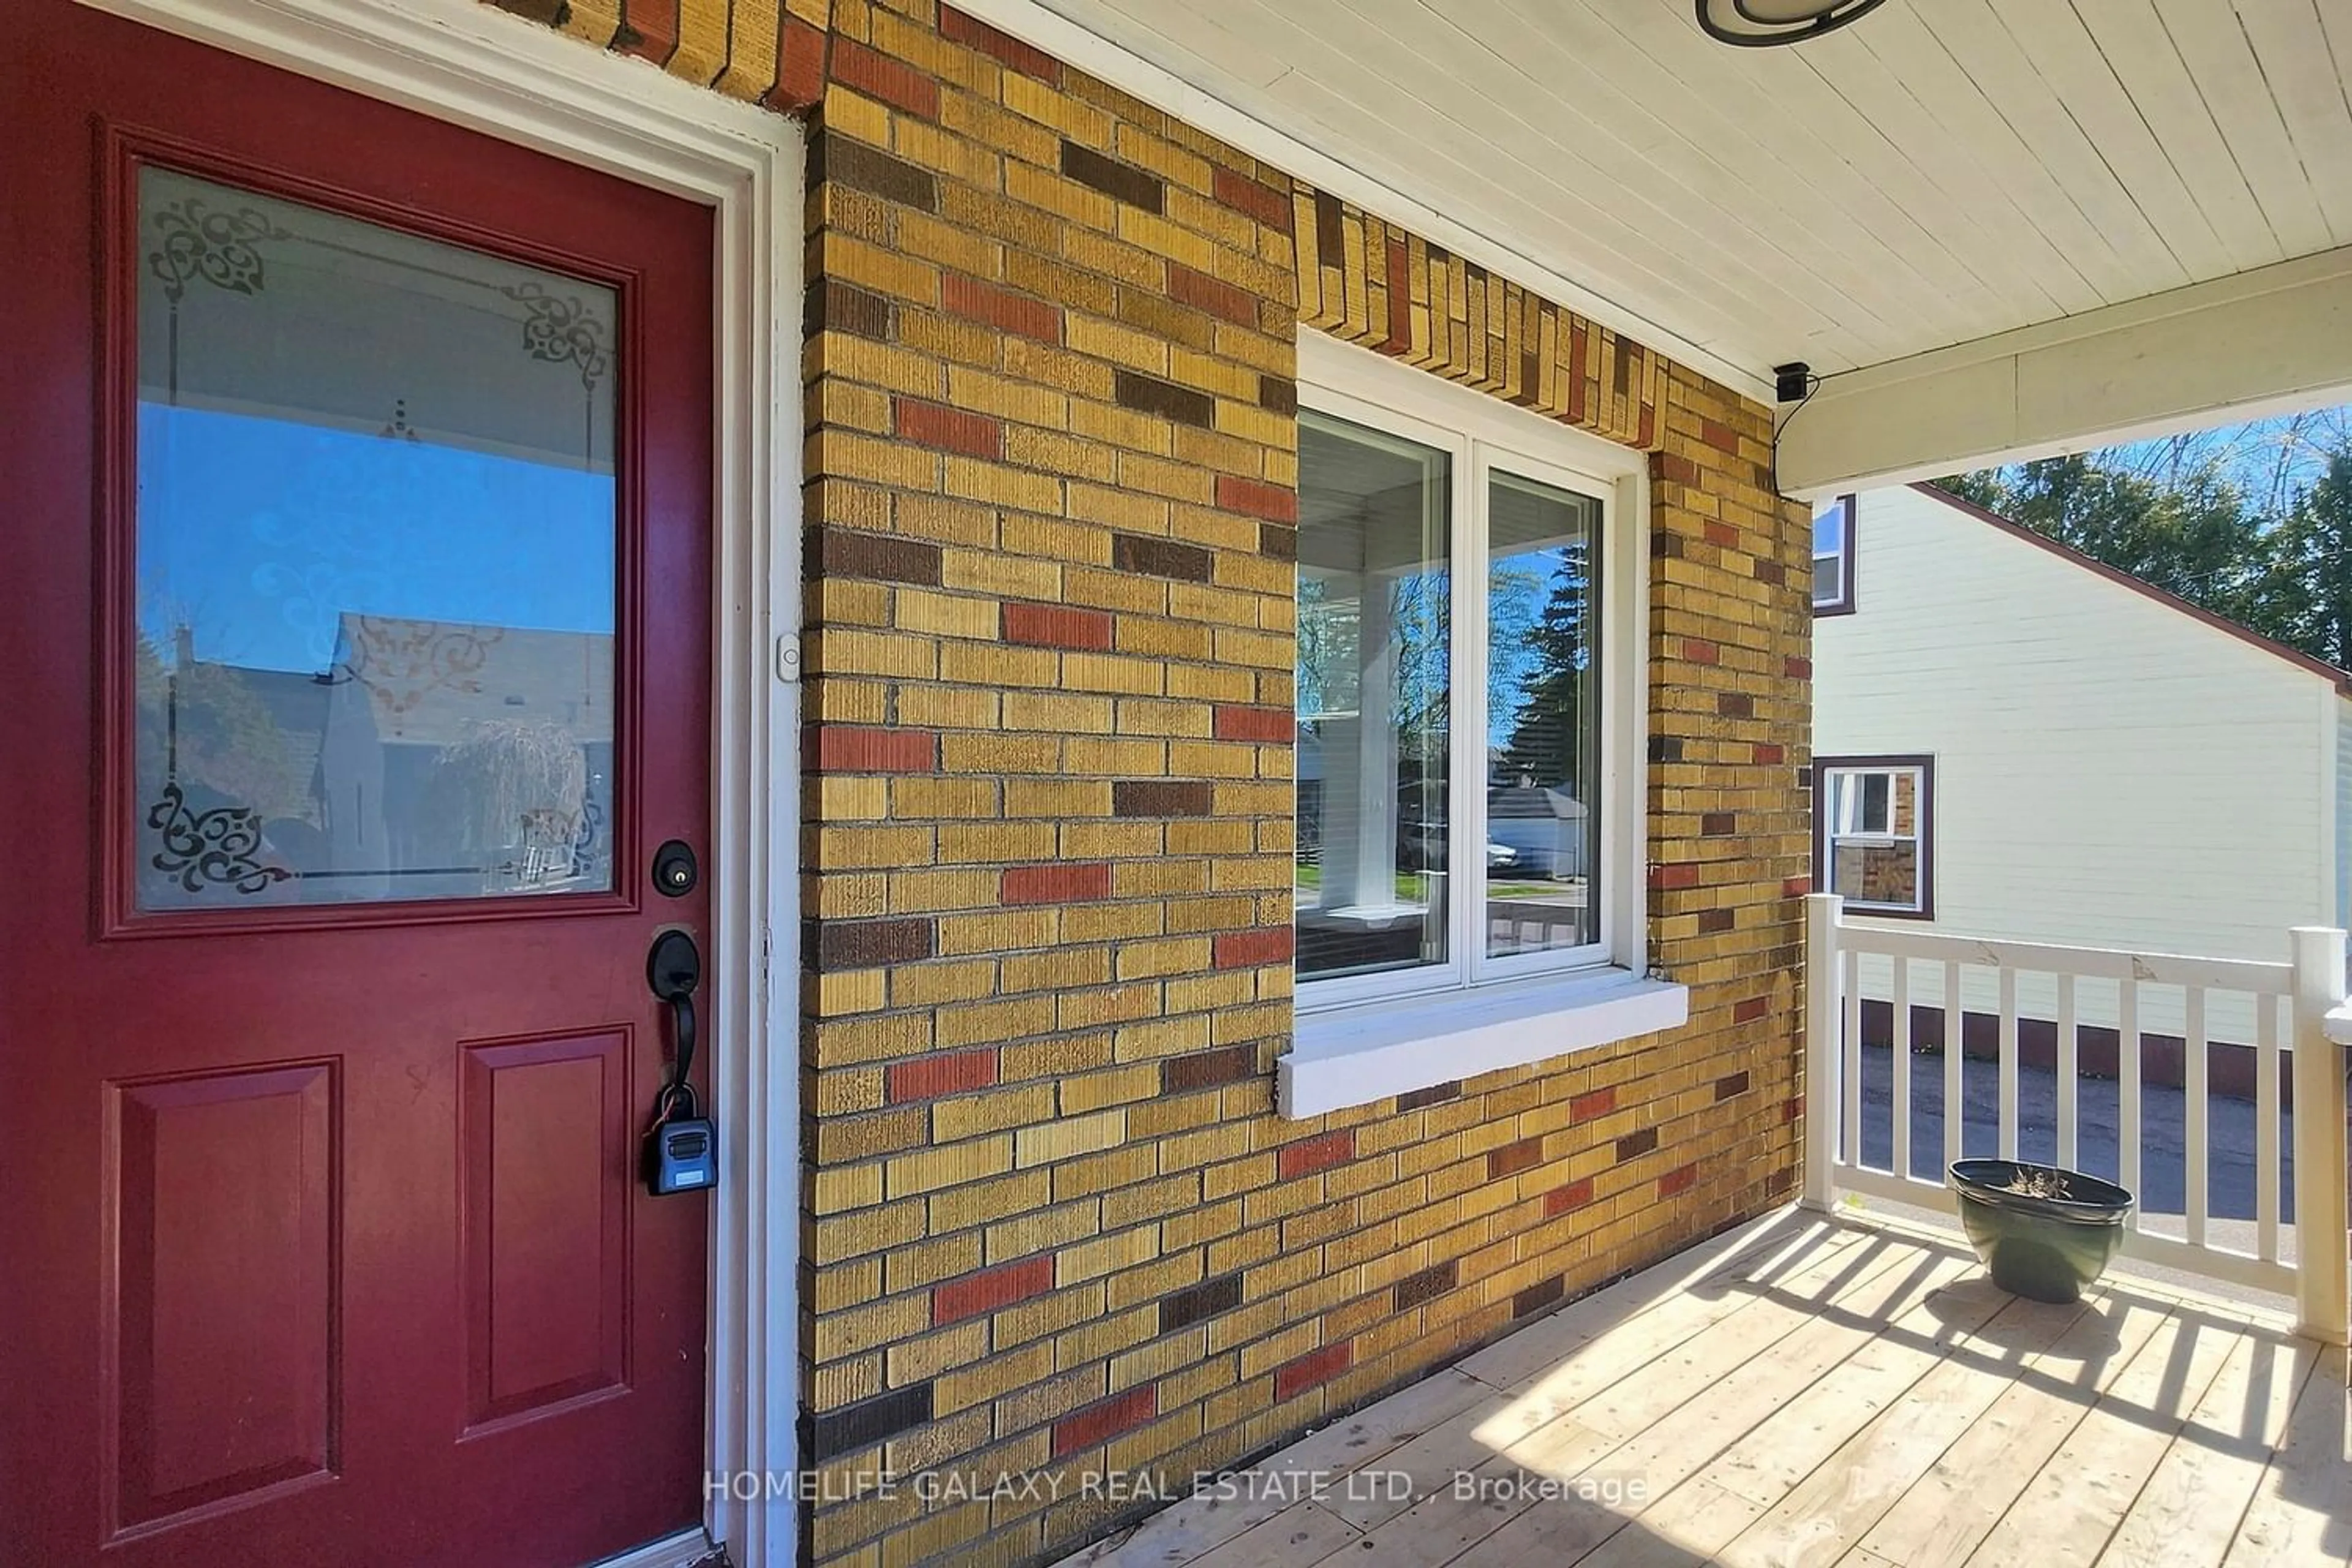 Home with brick exterior material for 221 Mitchell Ave, Oshawa Ontario L1H 2V7